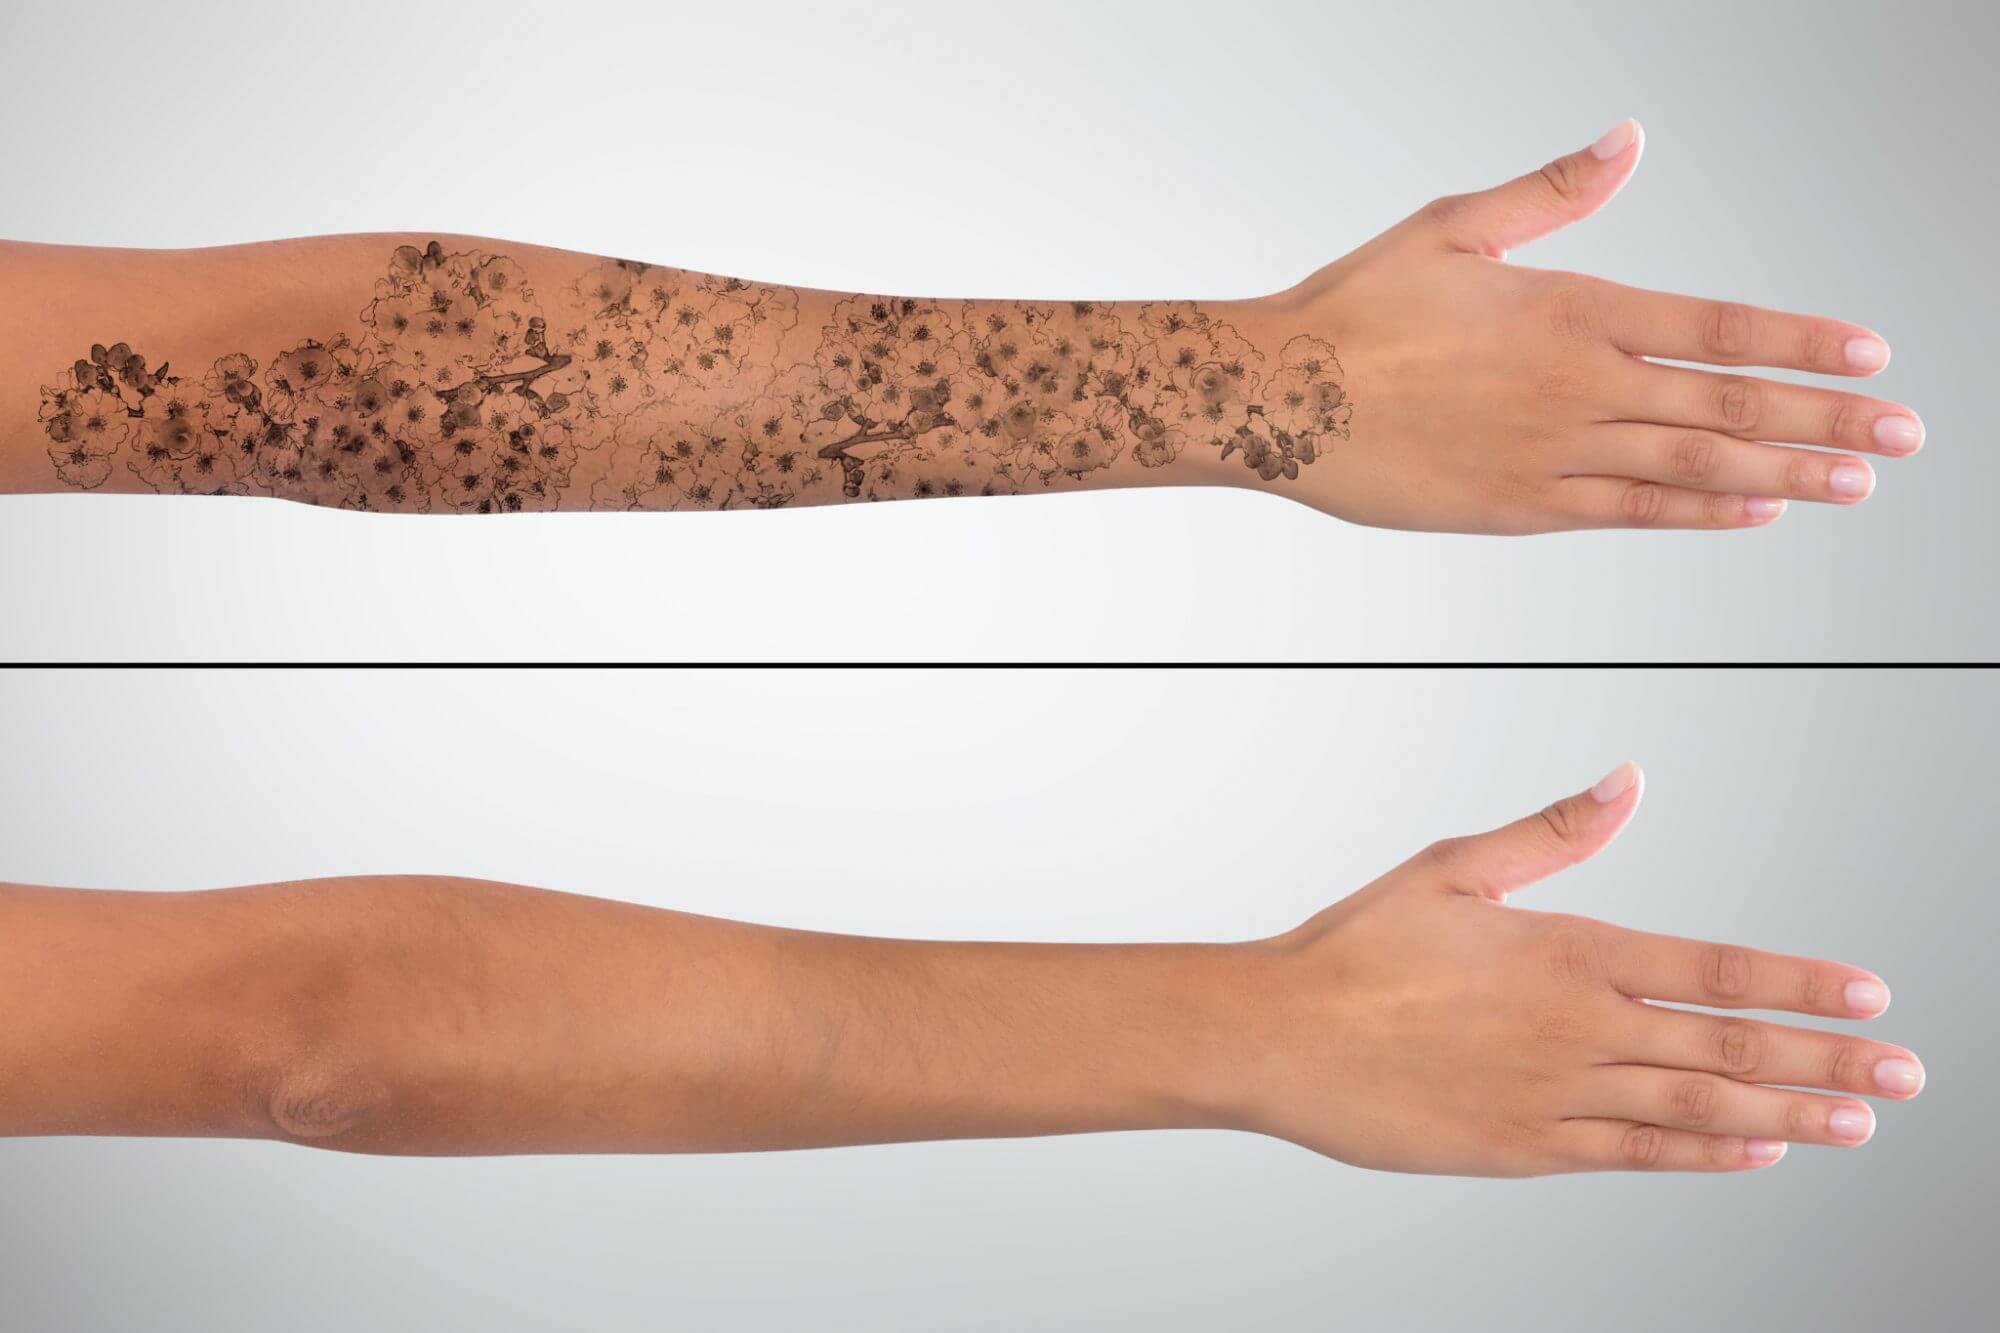 laser tatoo removal treatment at our dermatologists office in Sacramento  treating laser tatoo removal